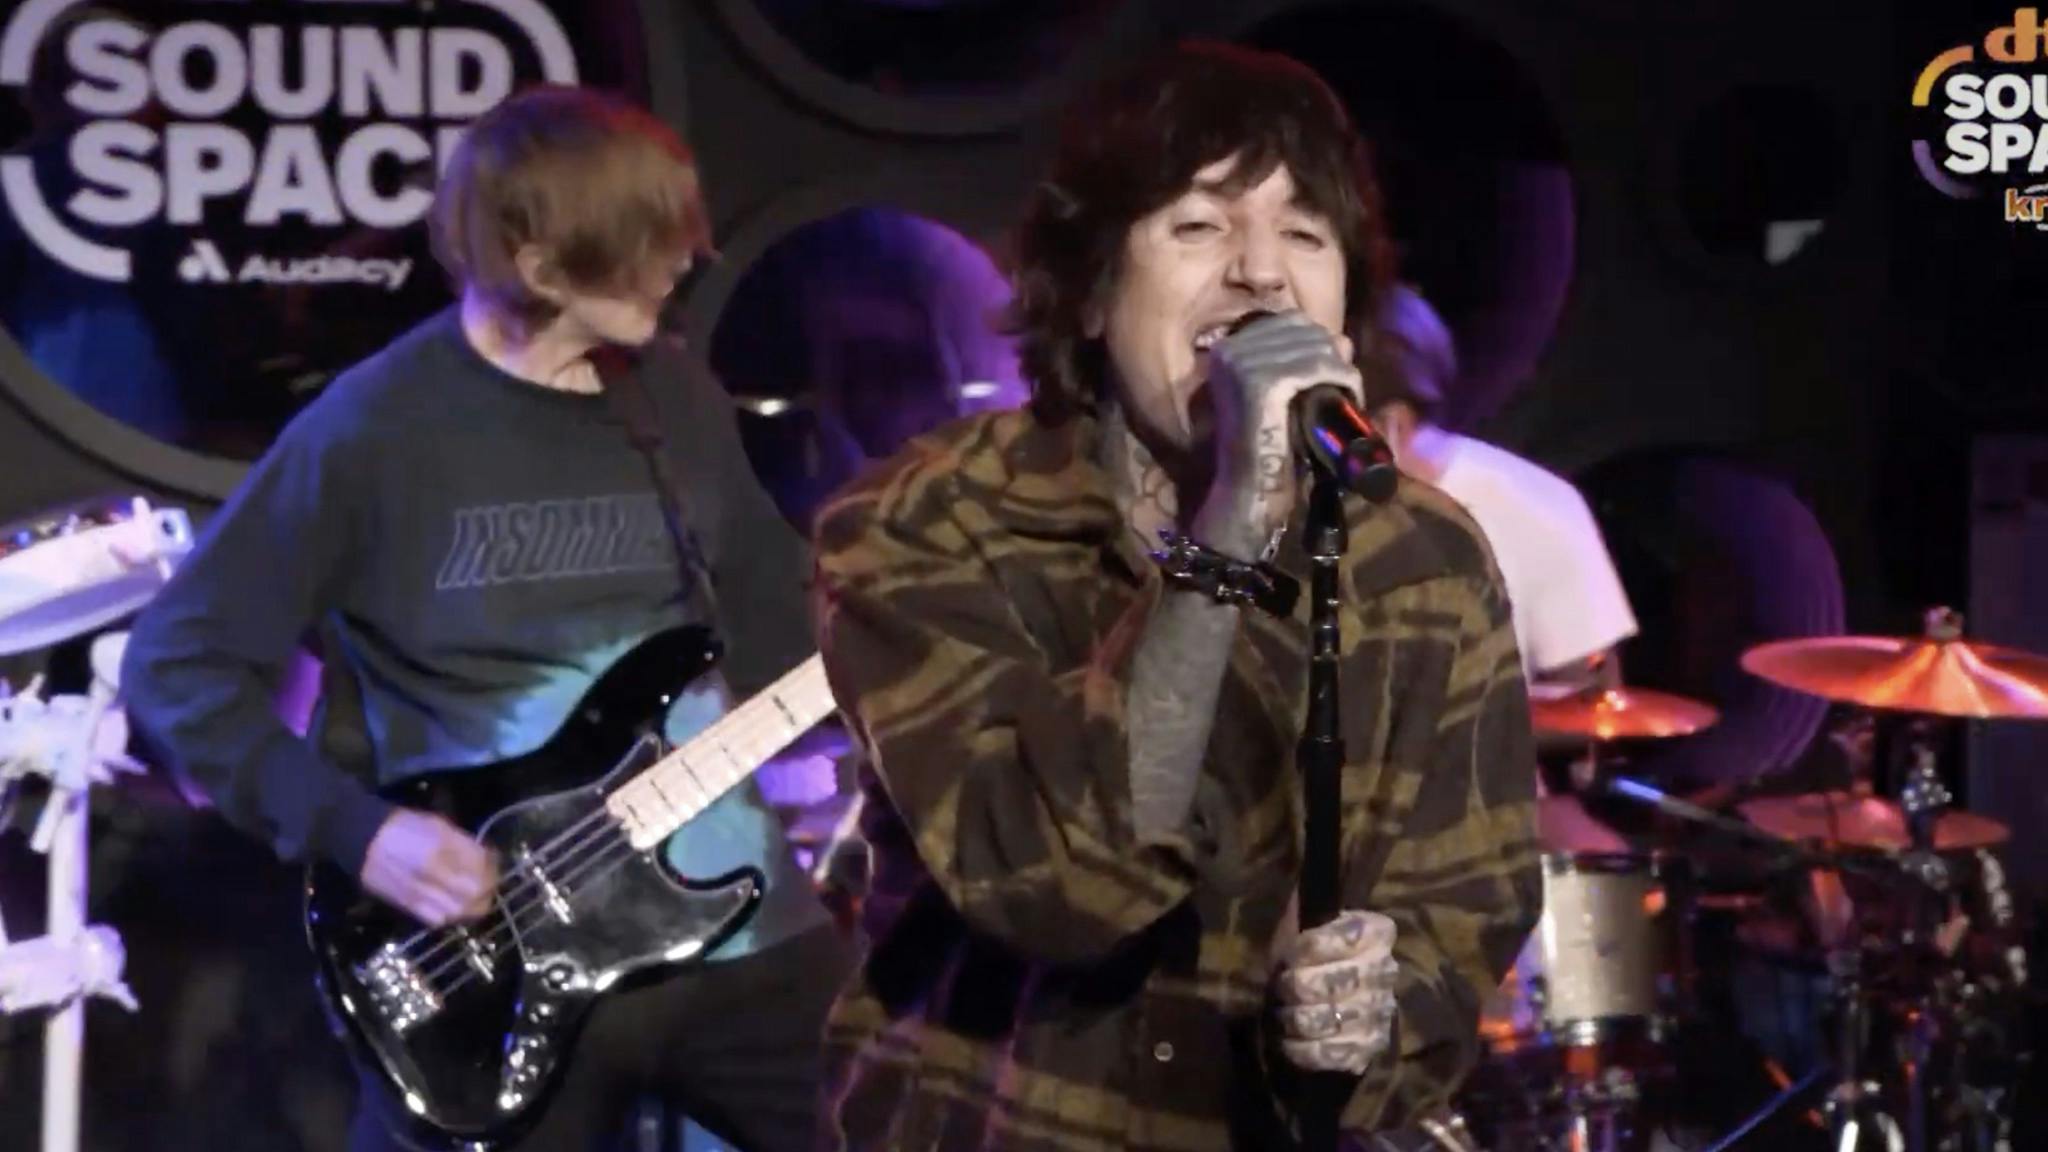 Watch Bring Me The Horizon perform an intimate four-song set